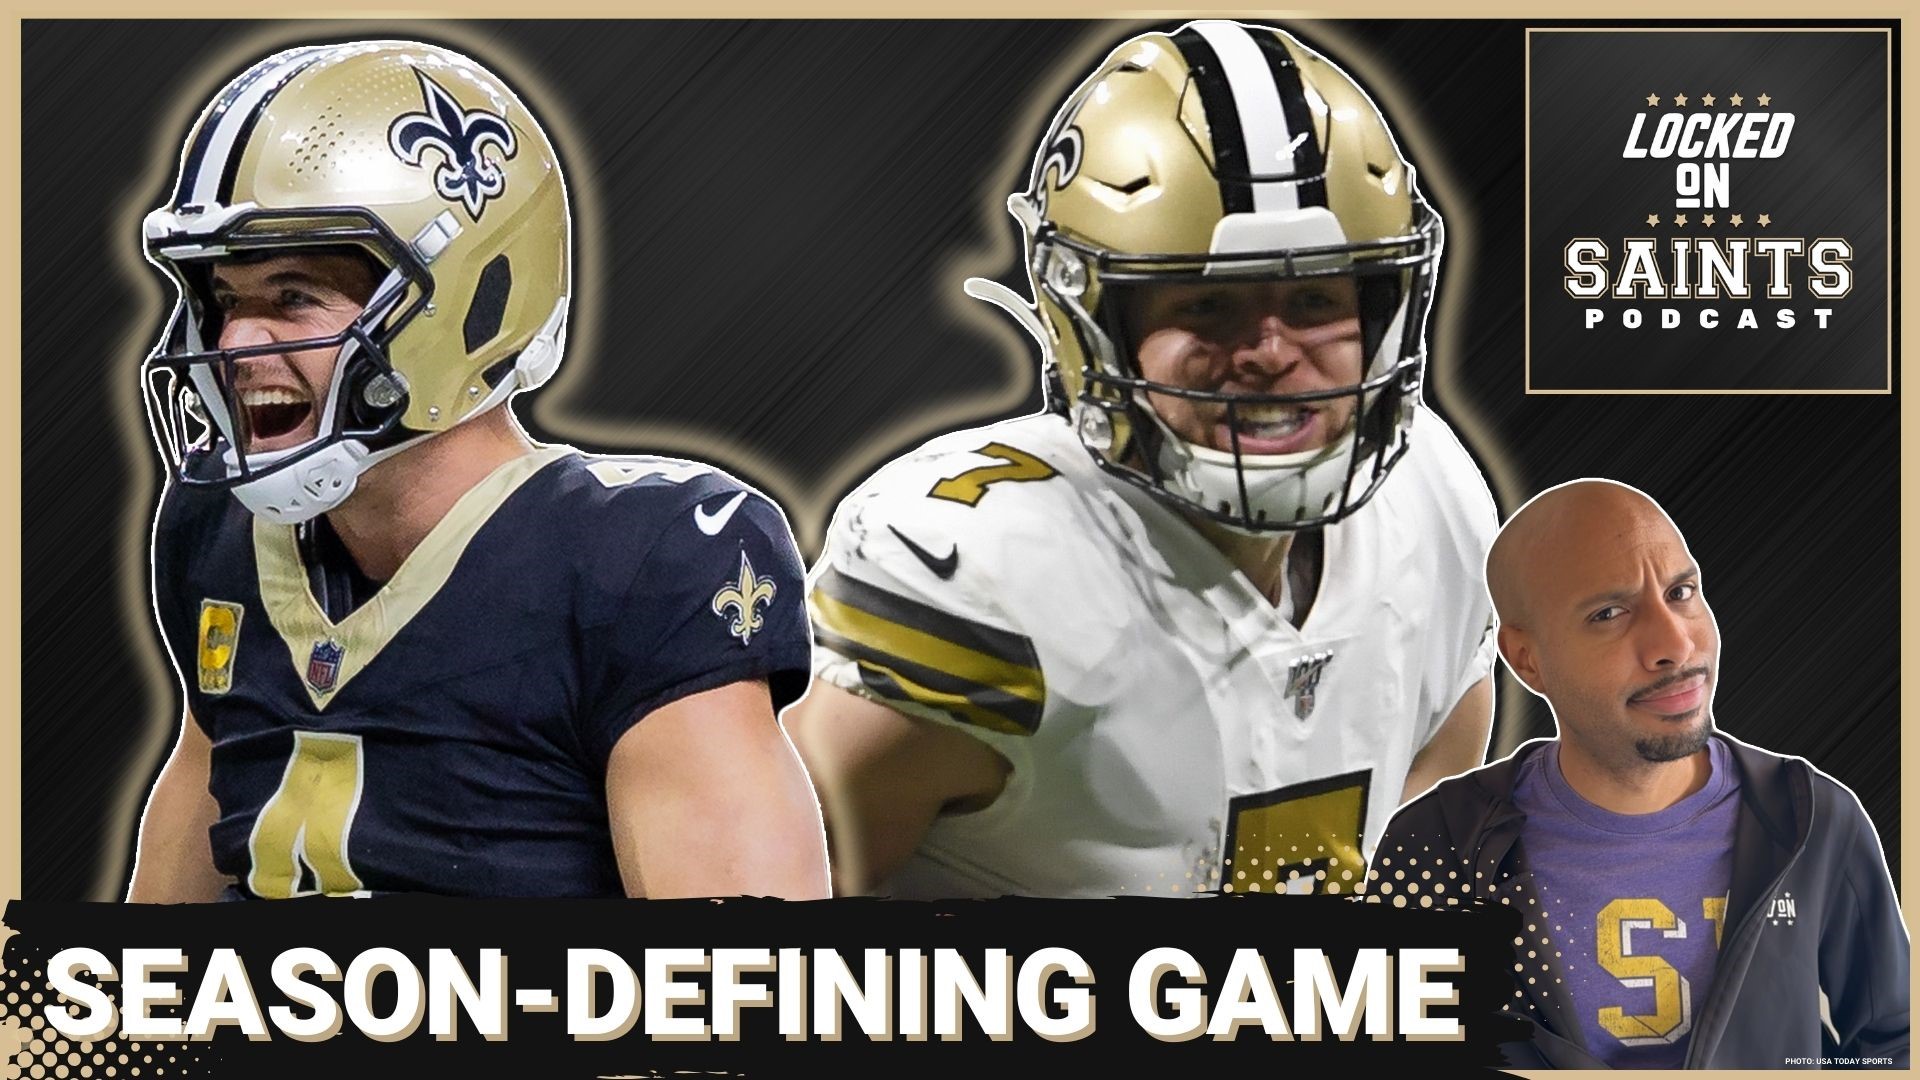 The New Orleans Saints are set to square up with the Atlanta Falcons in their most important game of the season.